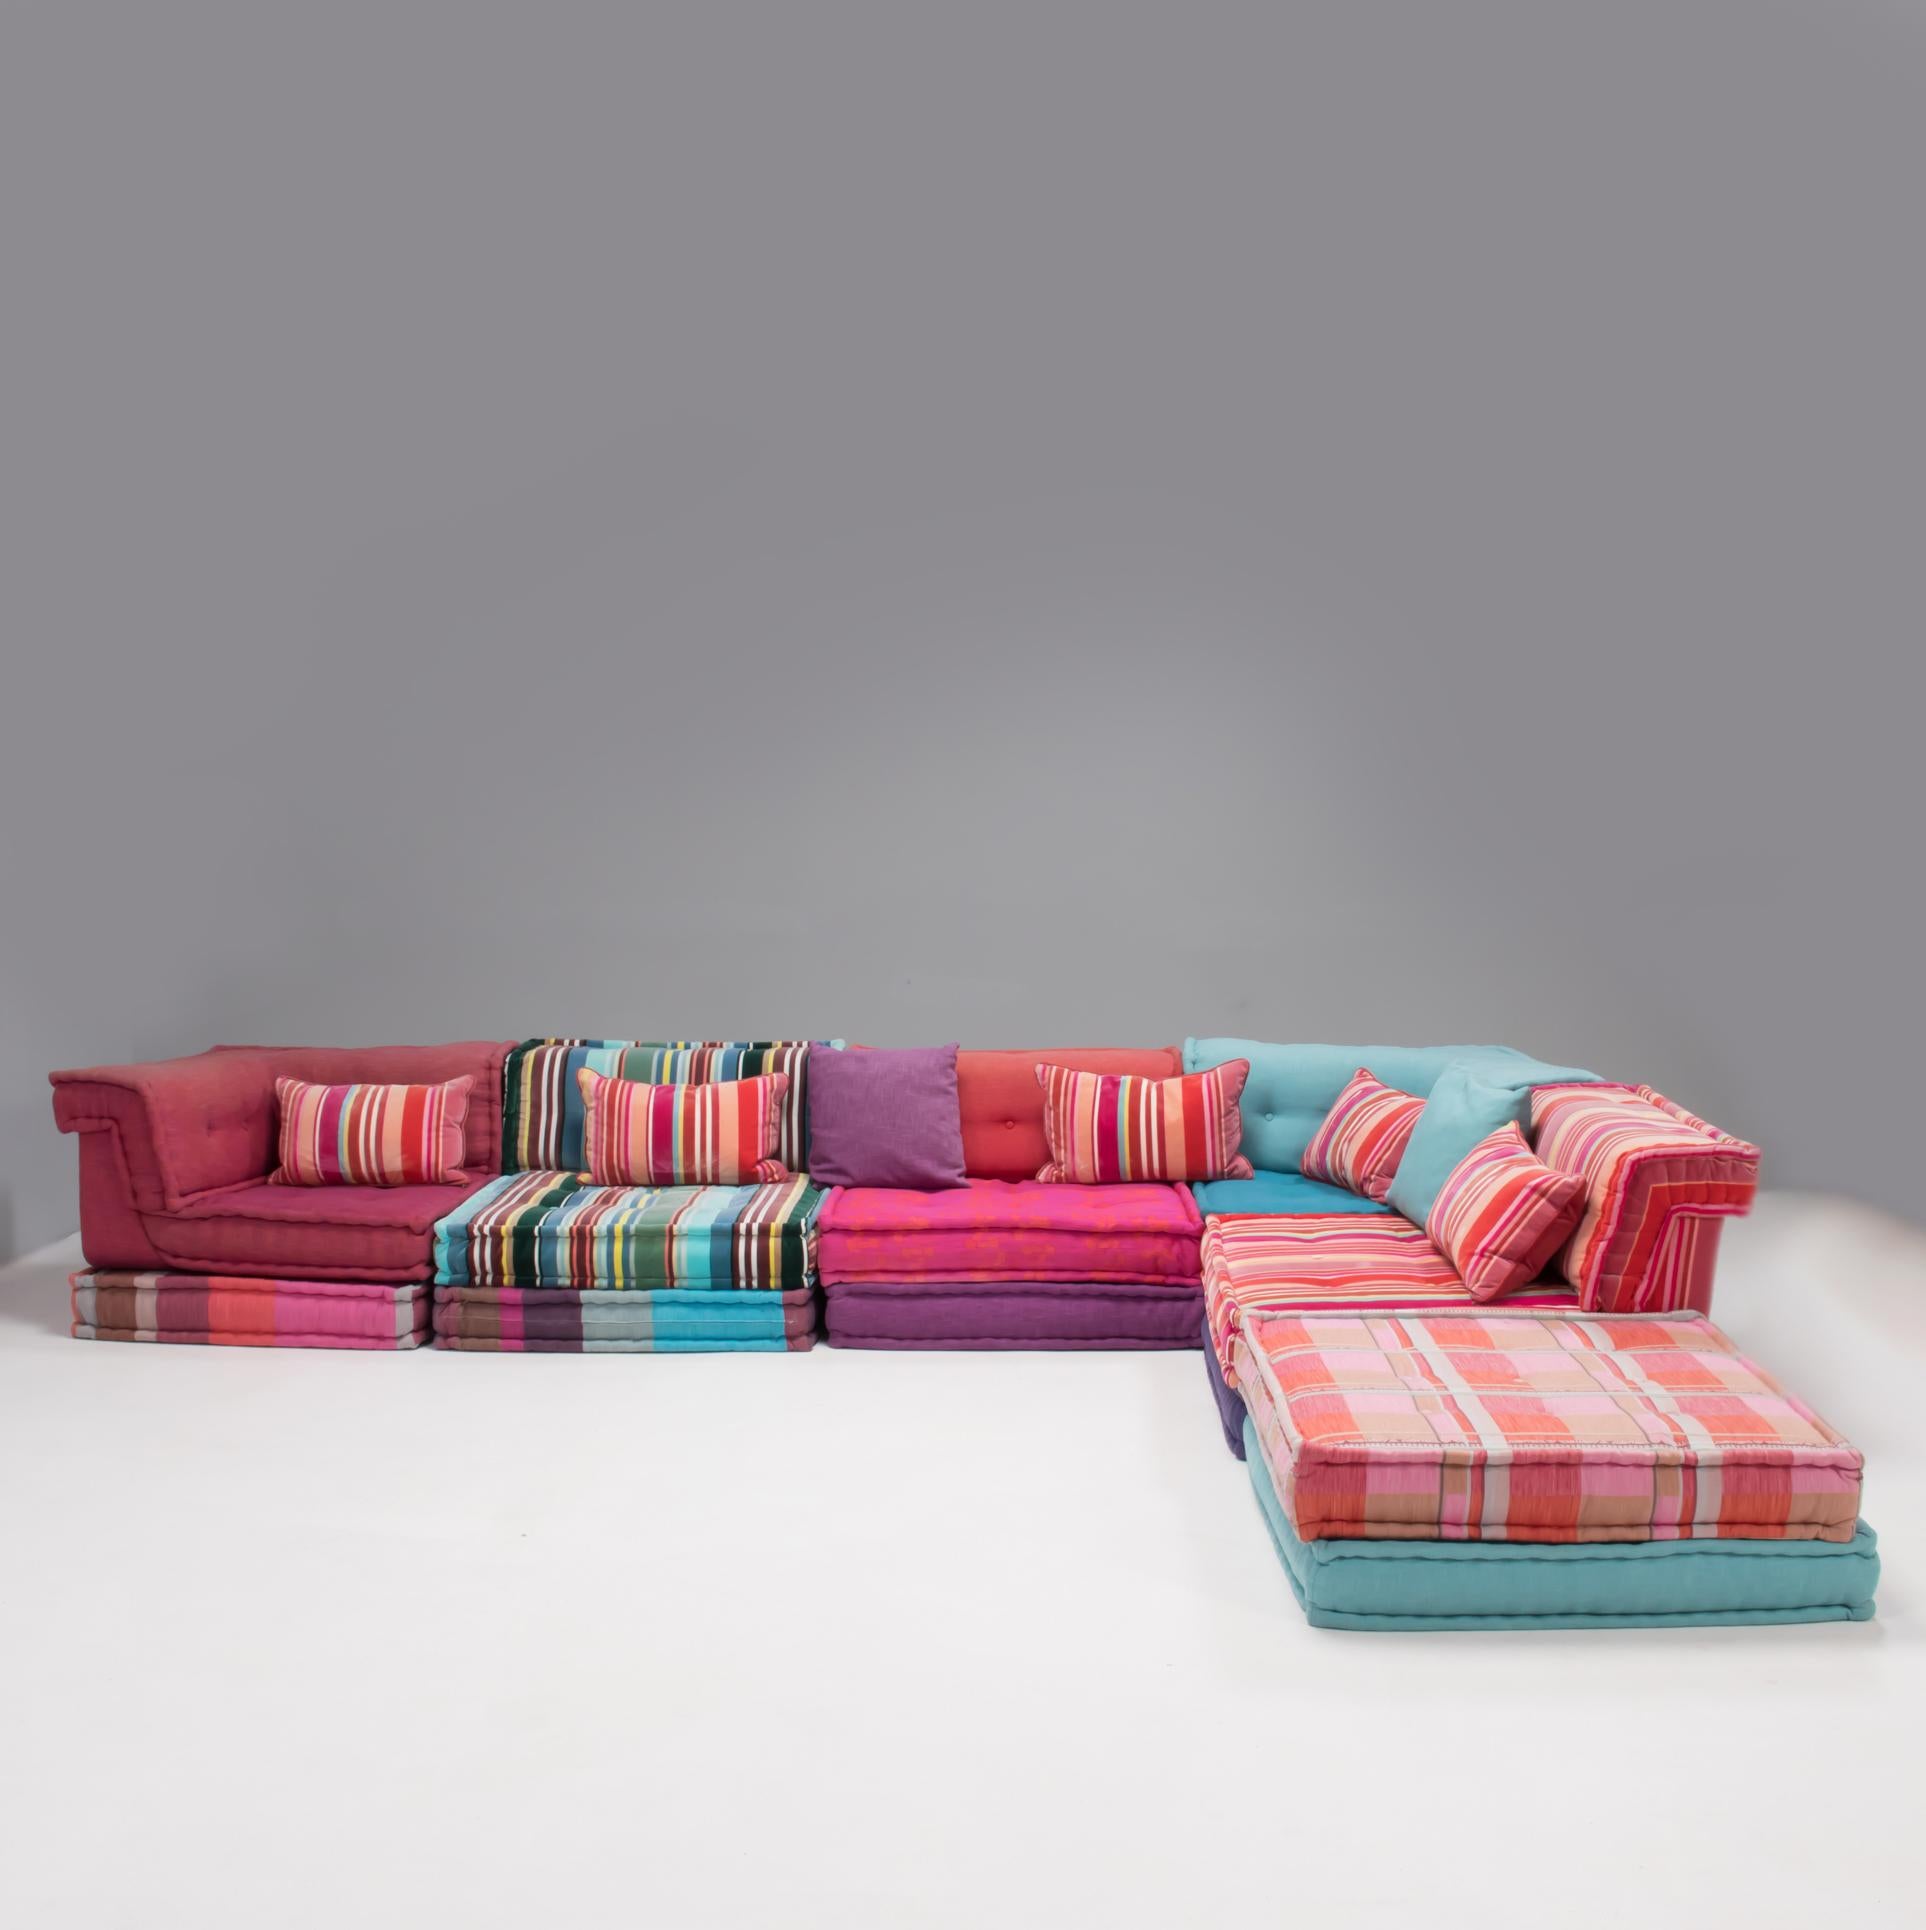 Originally designed by Hans Hopfer for Roche Bobois in 1971, the Mah Jong sofa has become a design classic.

Since its original conception, Roche Bobois has collaborated with a variety of design houses to upholster the sofa, bringing the design